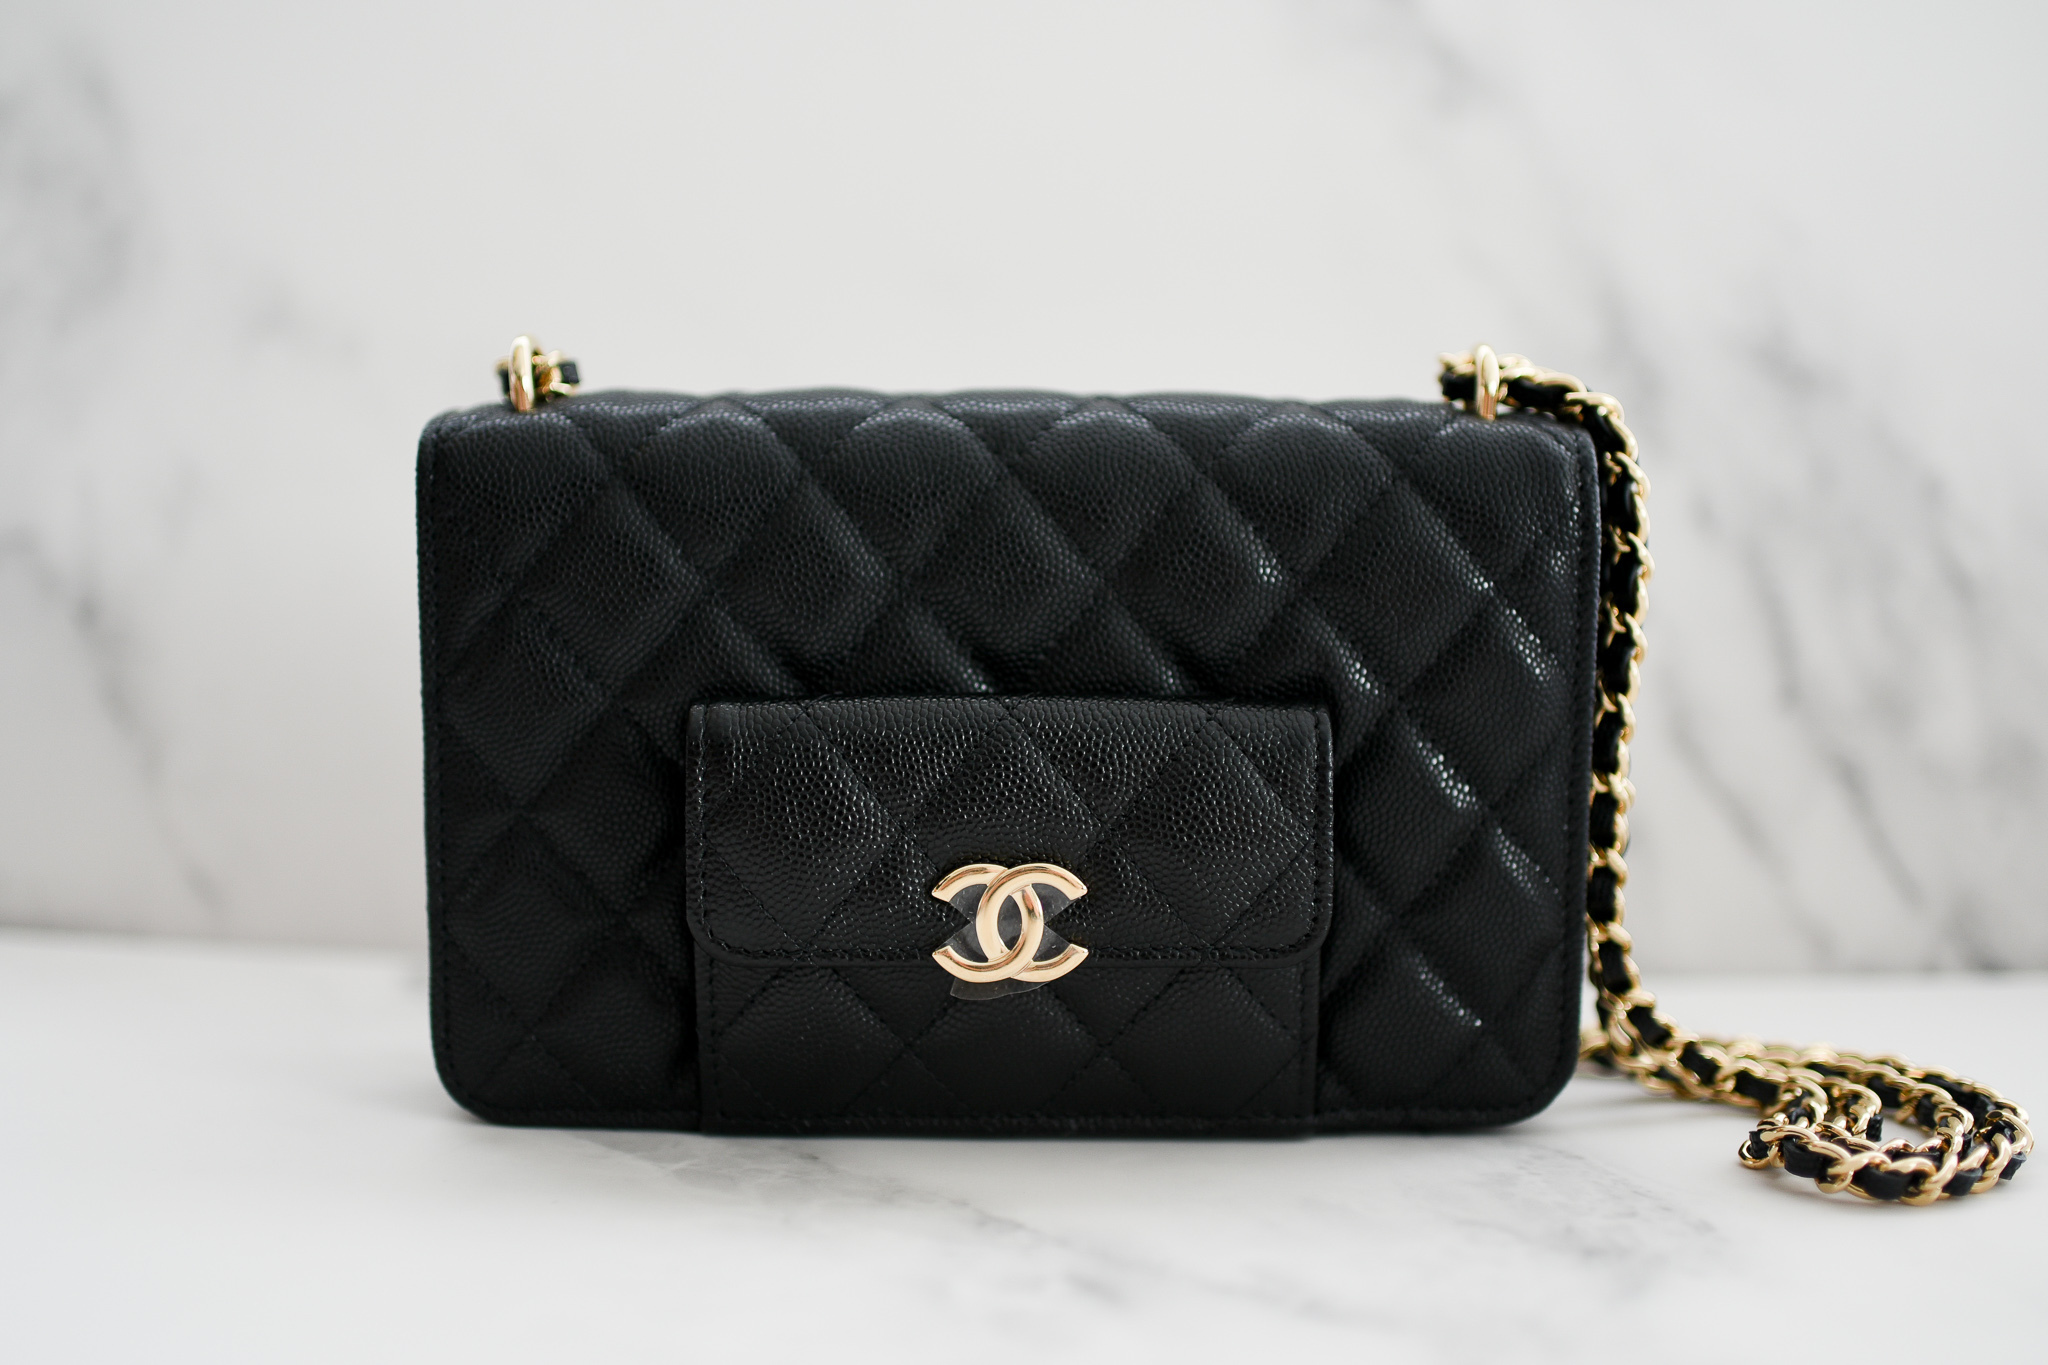 Chanel Pre-owned 1996 CC logo-embossed Clutch Bag - Black